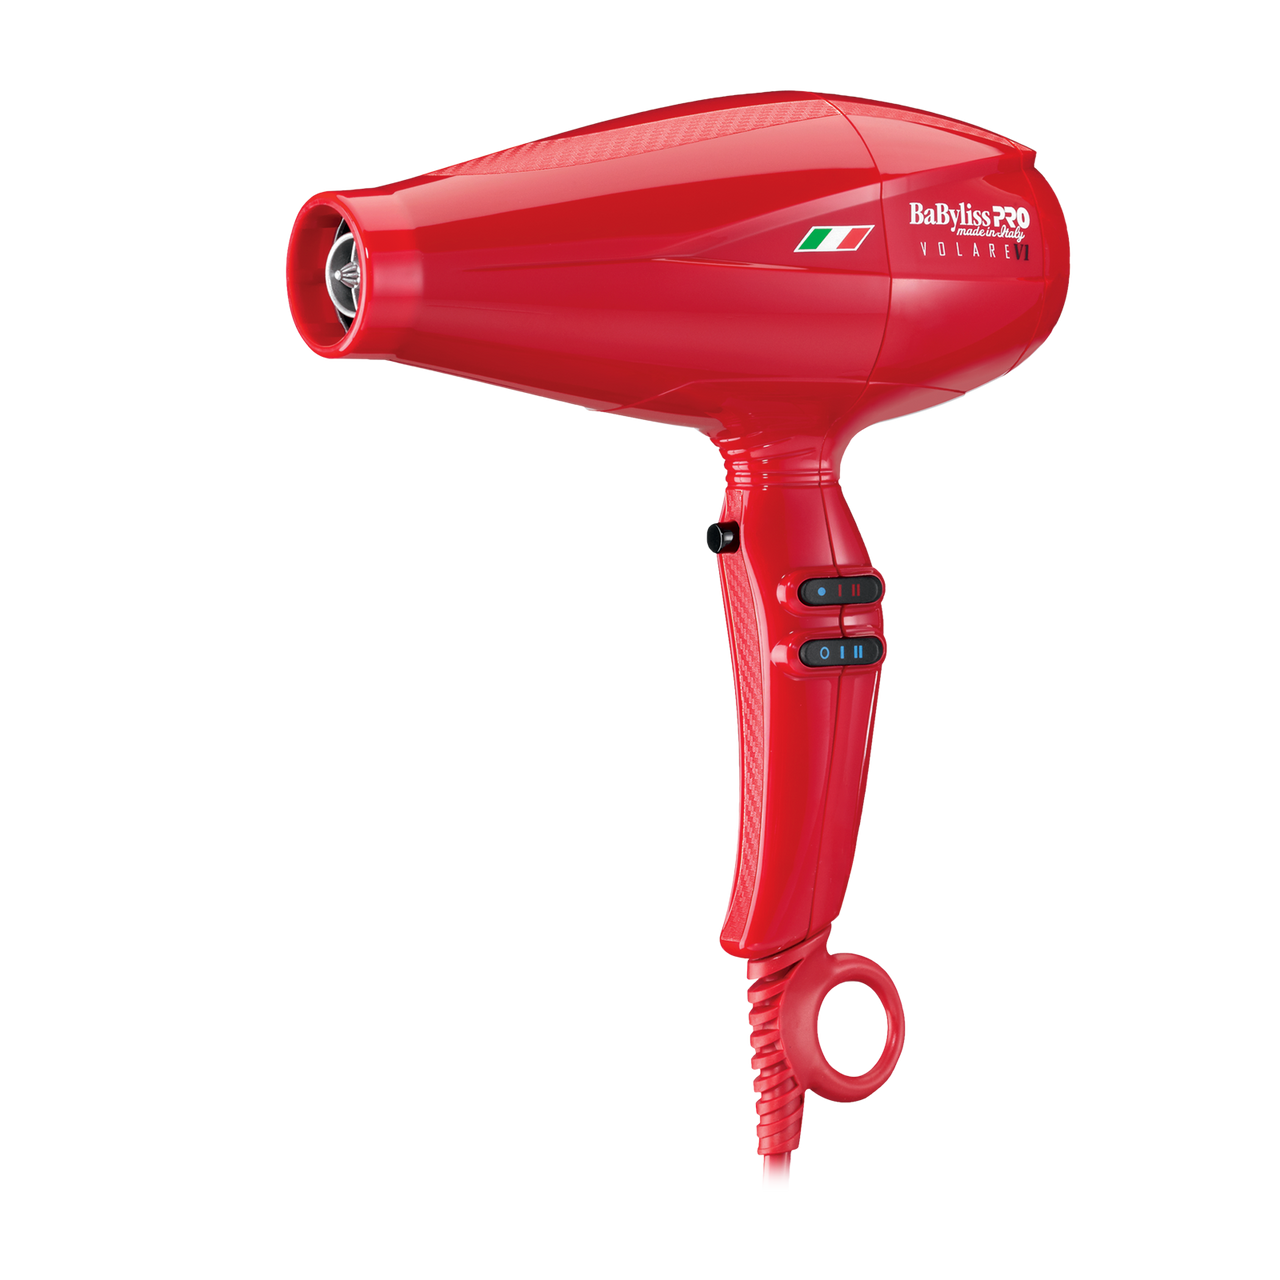 Dannyco Electrical Babyliss Pro Ferrari Red Volare V1 Blow Dryer 1 Each